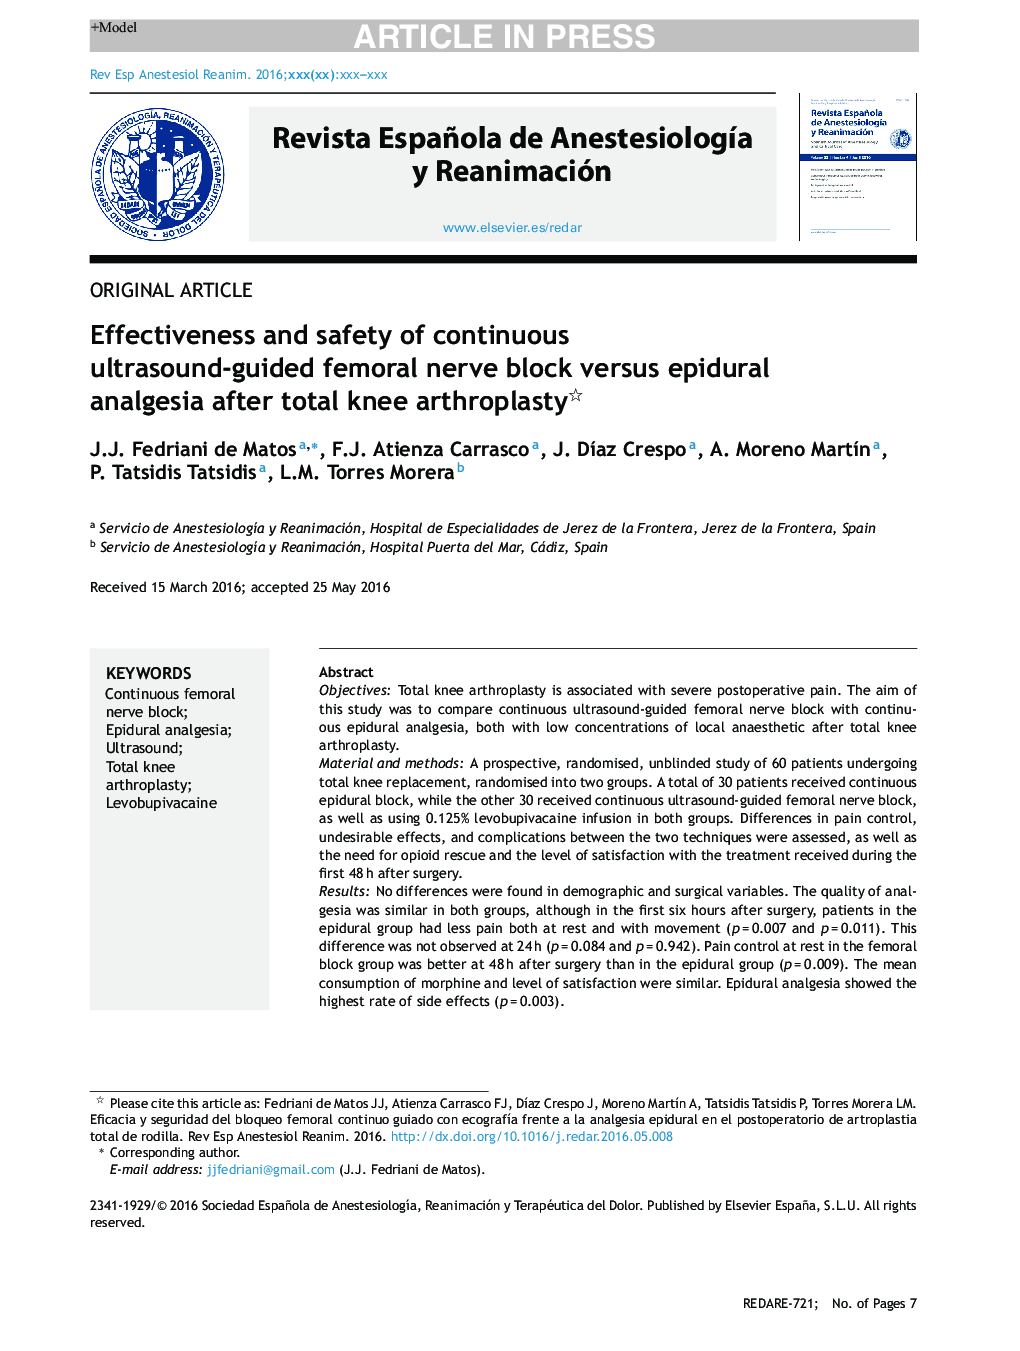 Effectiveness and safety of continuous ultrasound-guided femoral nerve block versus epidural analgesia after total knee arthroplasty